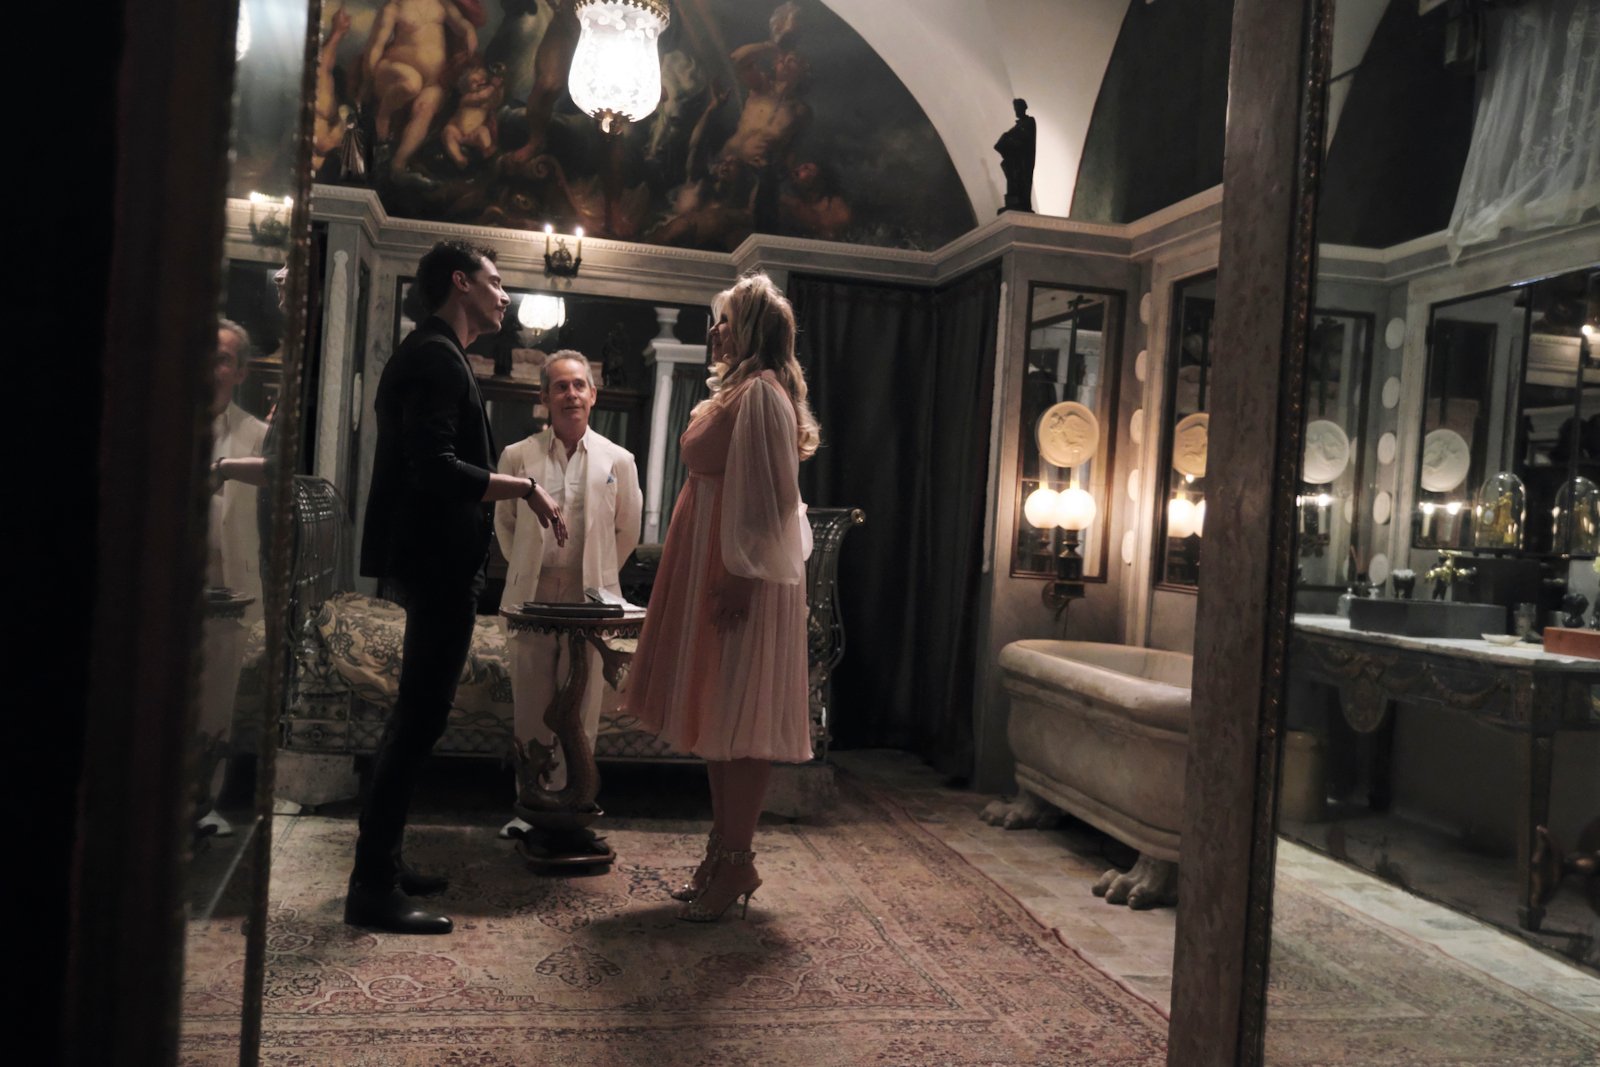 Stefano Gianino, Tom Hollander, and Jennifer Coolidge in 'The White Lotus' Season 2. They're standing in a circle and talking to one another.